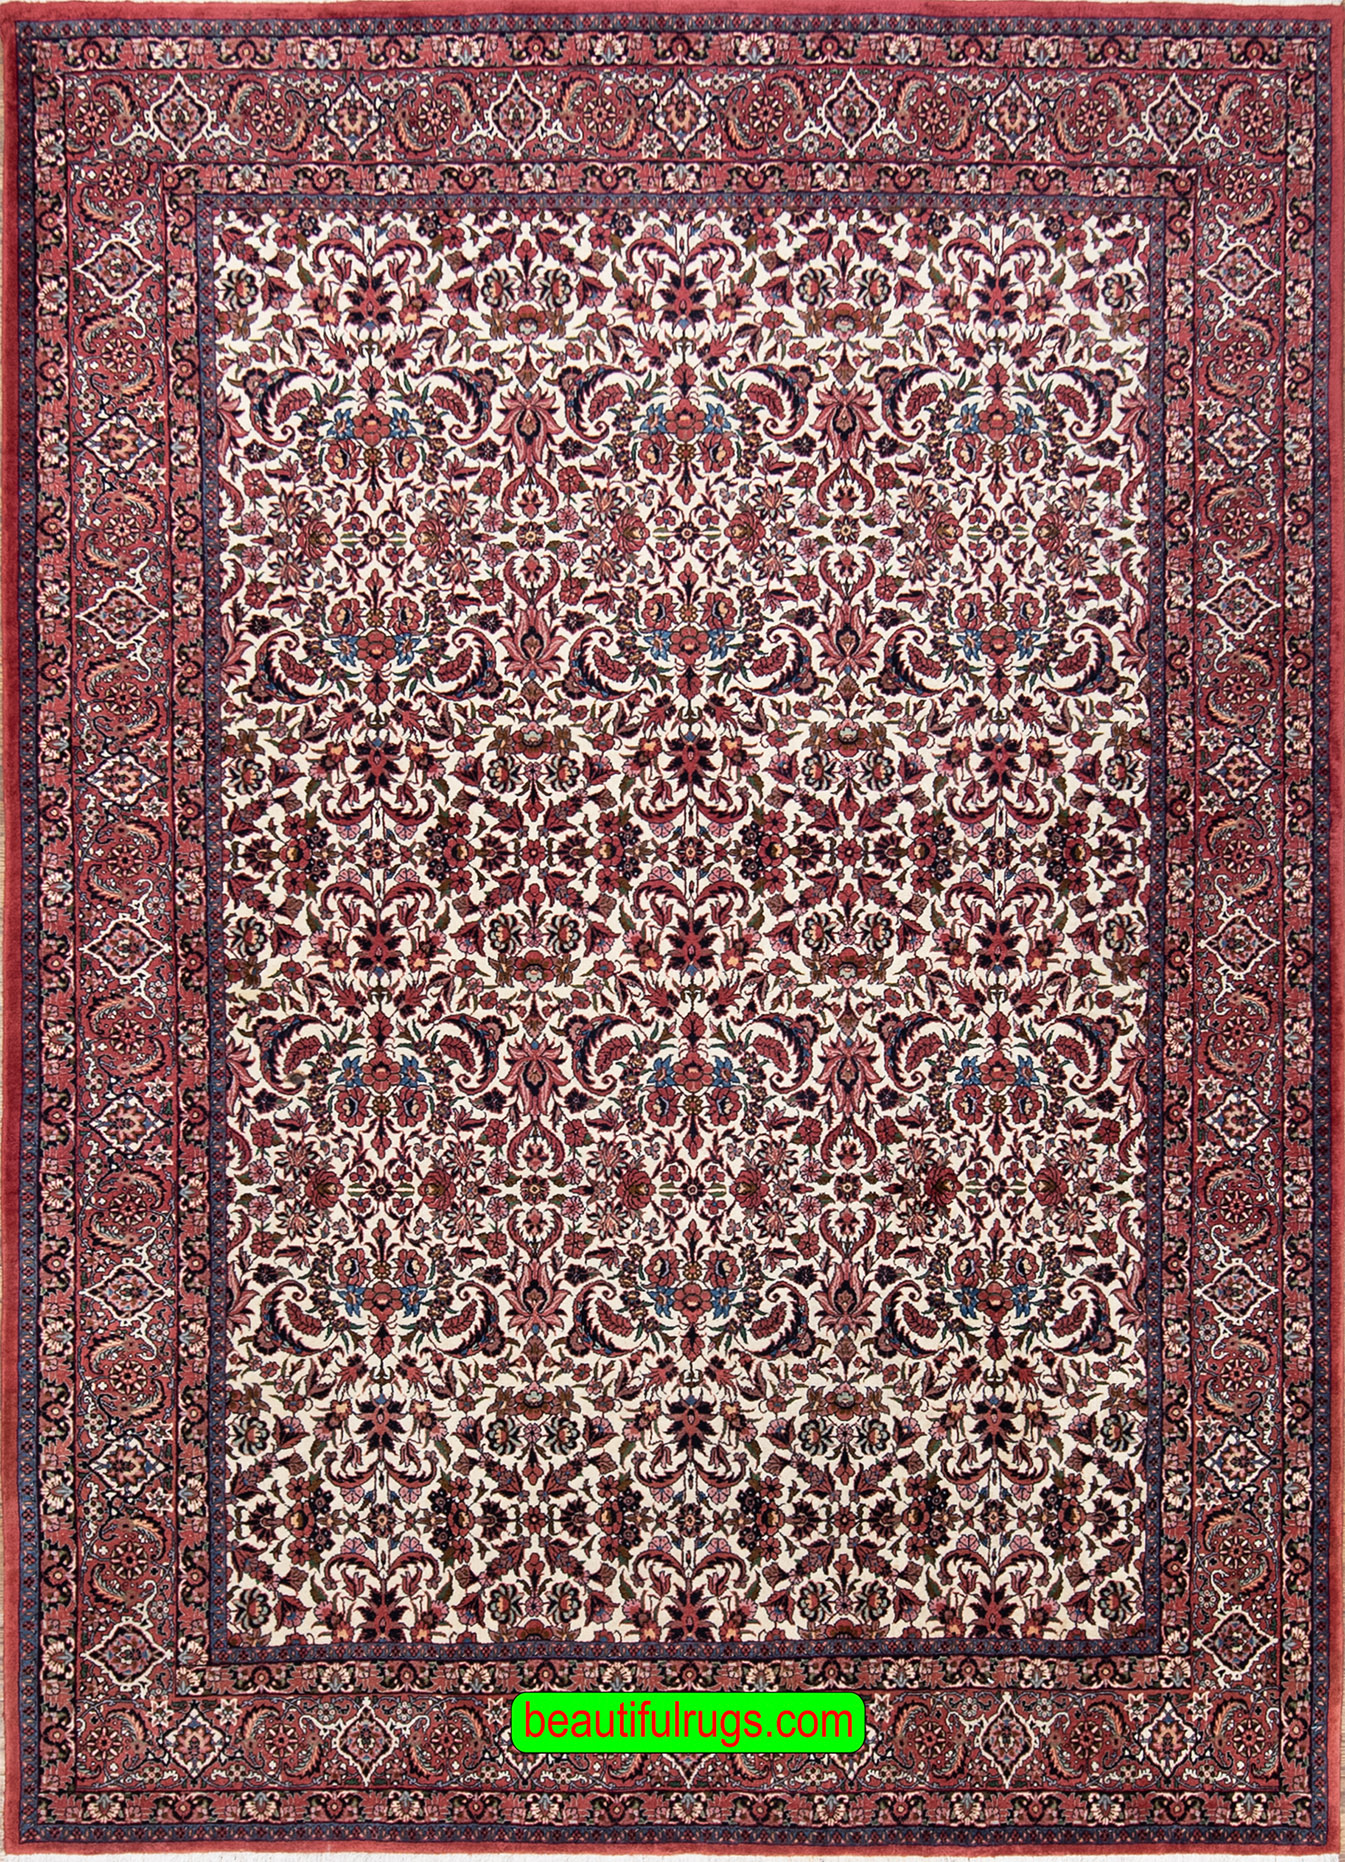 Persian Bijar rug with beige and rose colors, allover design. Size 6.8x9.11